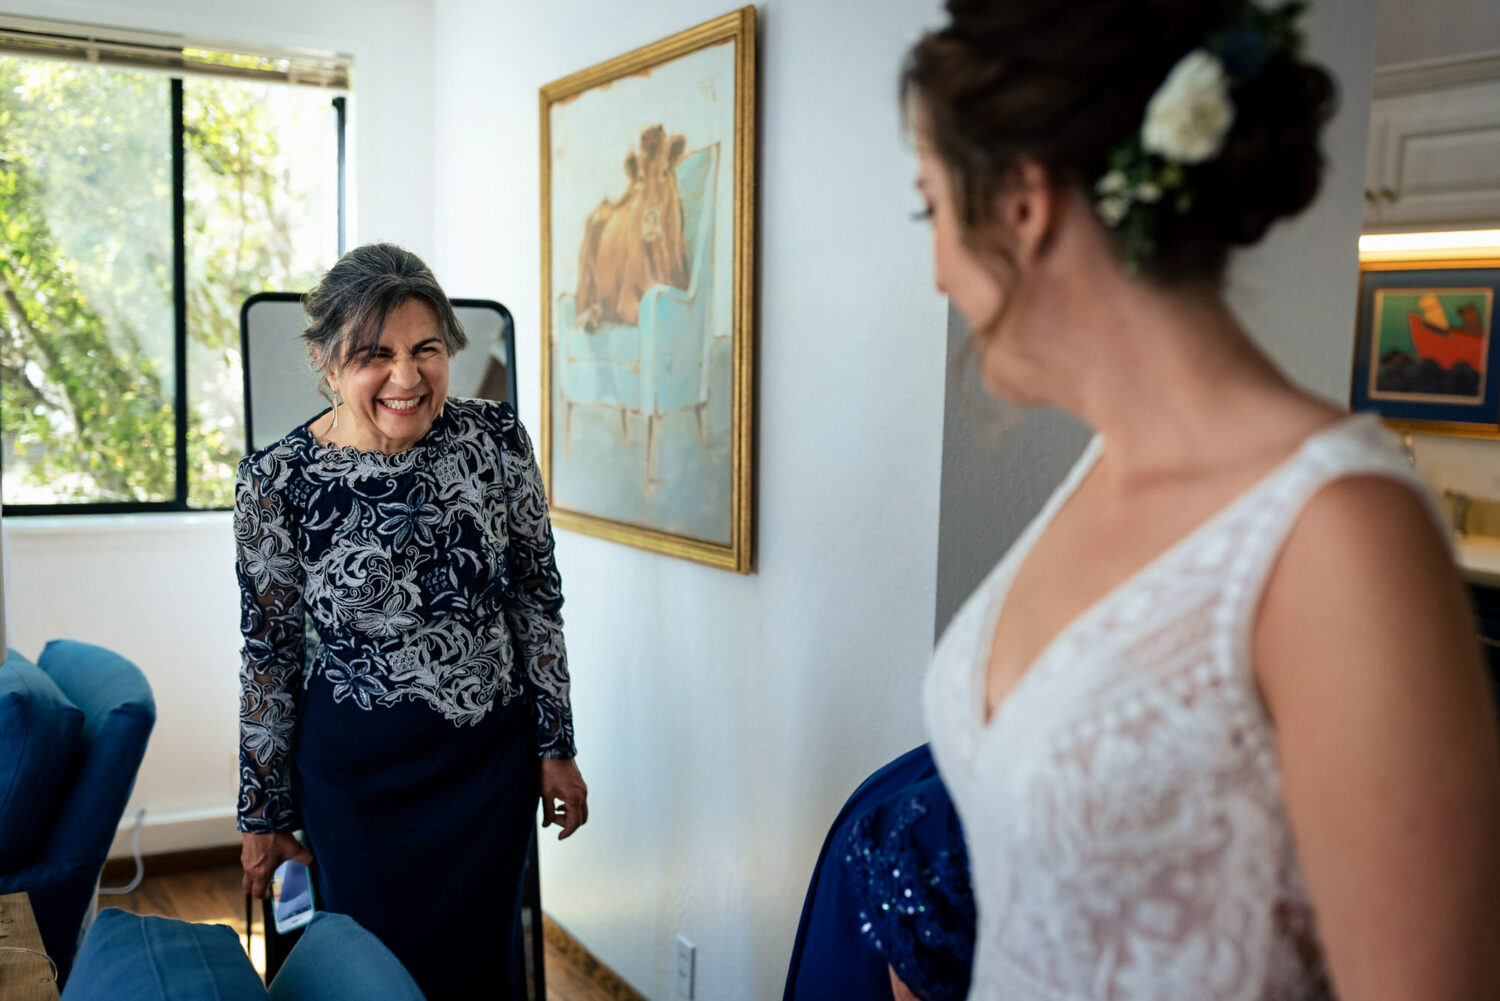 Mother of the groom wearing a navy blue and white dress.